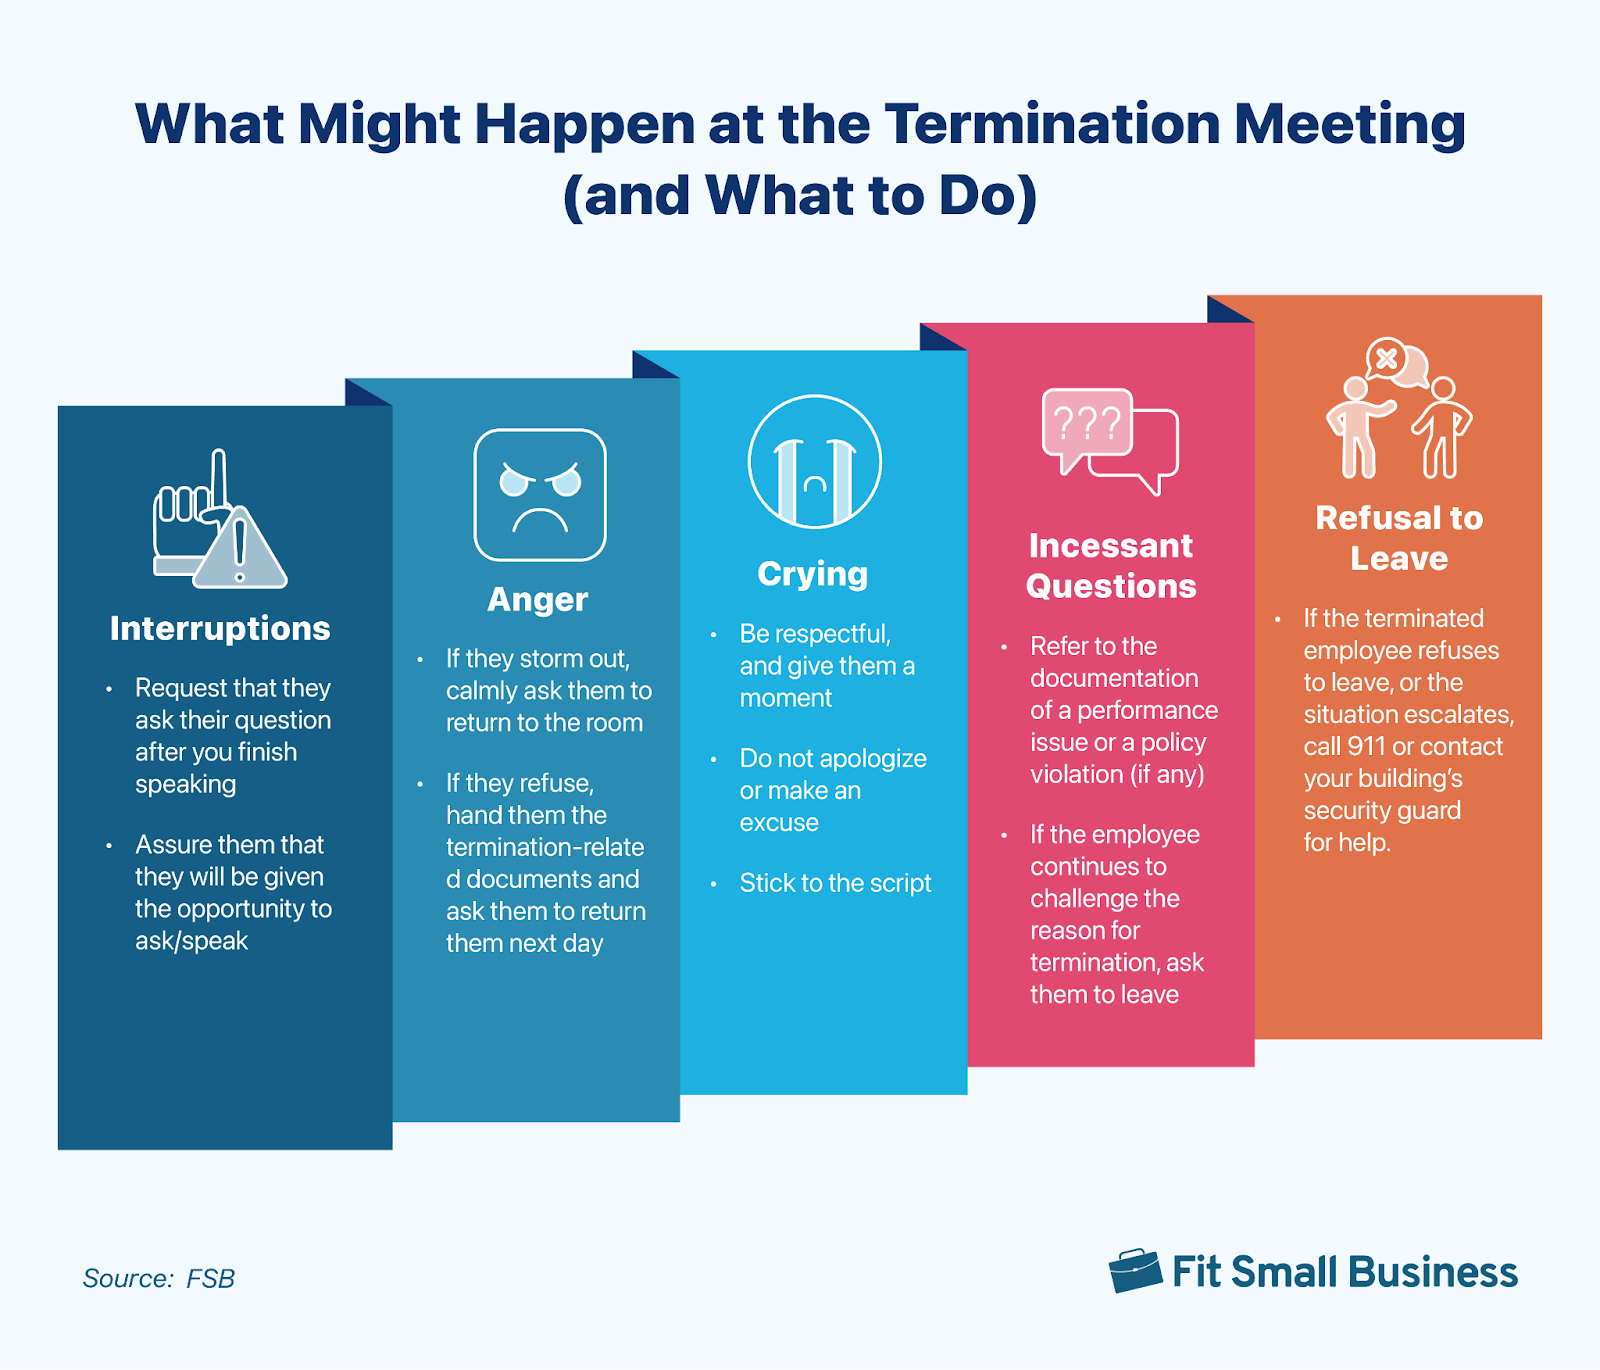 What Might Happen at the Termination Meeting and What to Do.